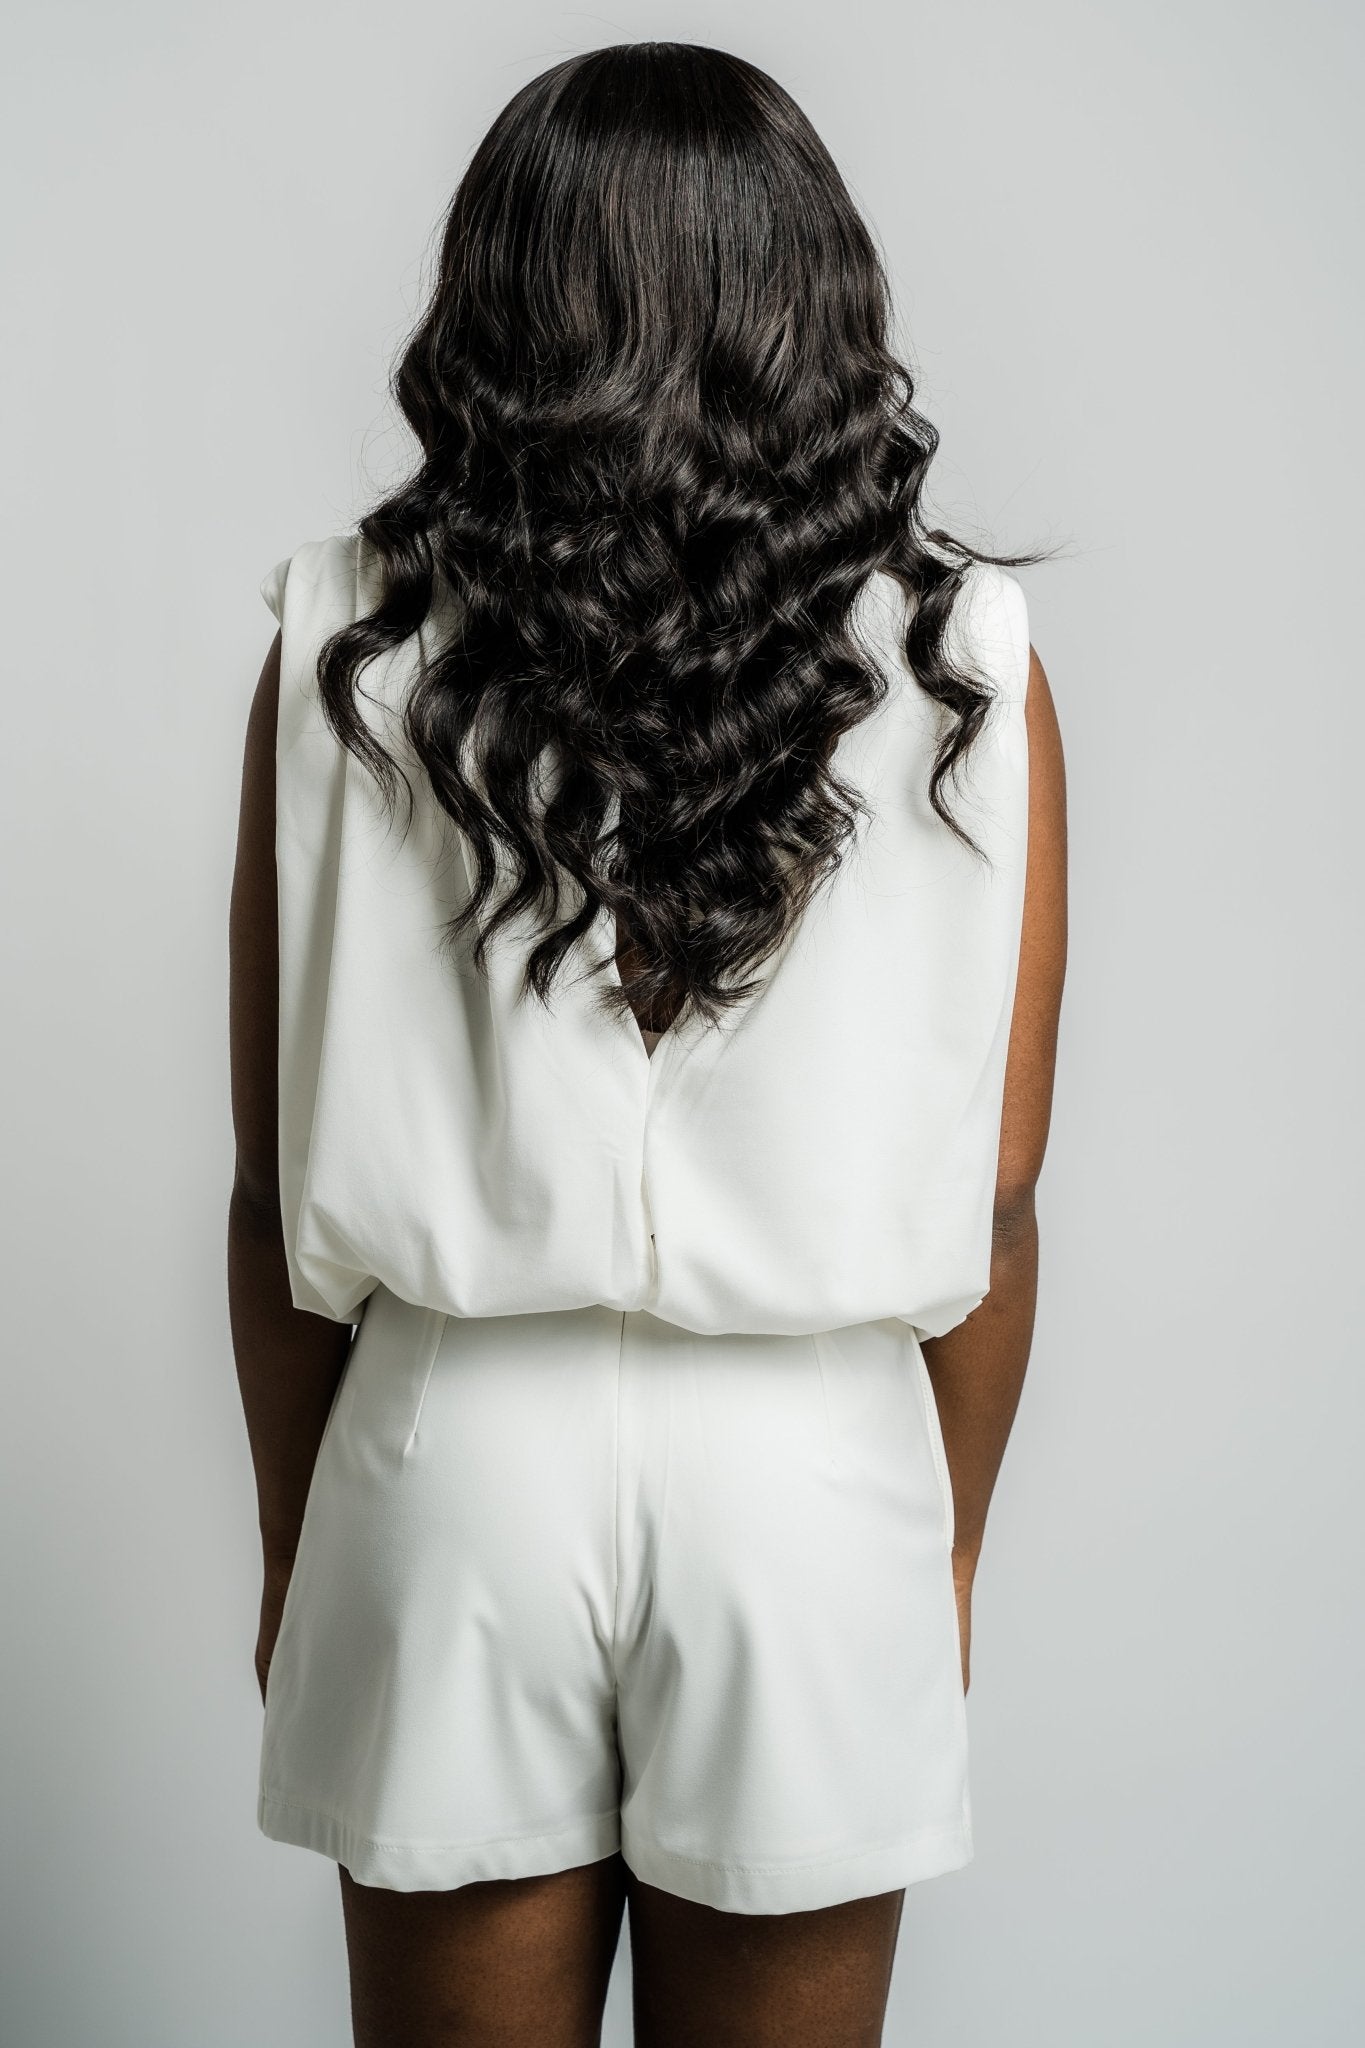 Open back romper white - Affordable Romper - Boutique Rompers & Pantsuits at Lush Fashion Lounge Boutique in Oklahoma City